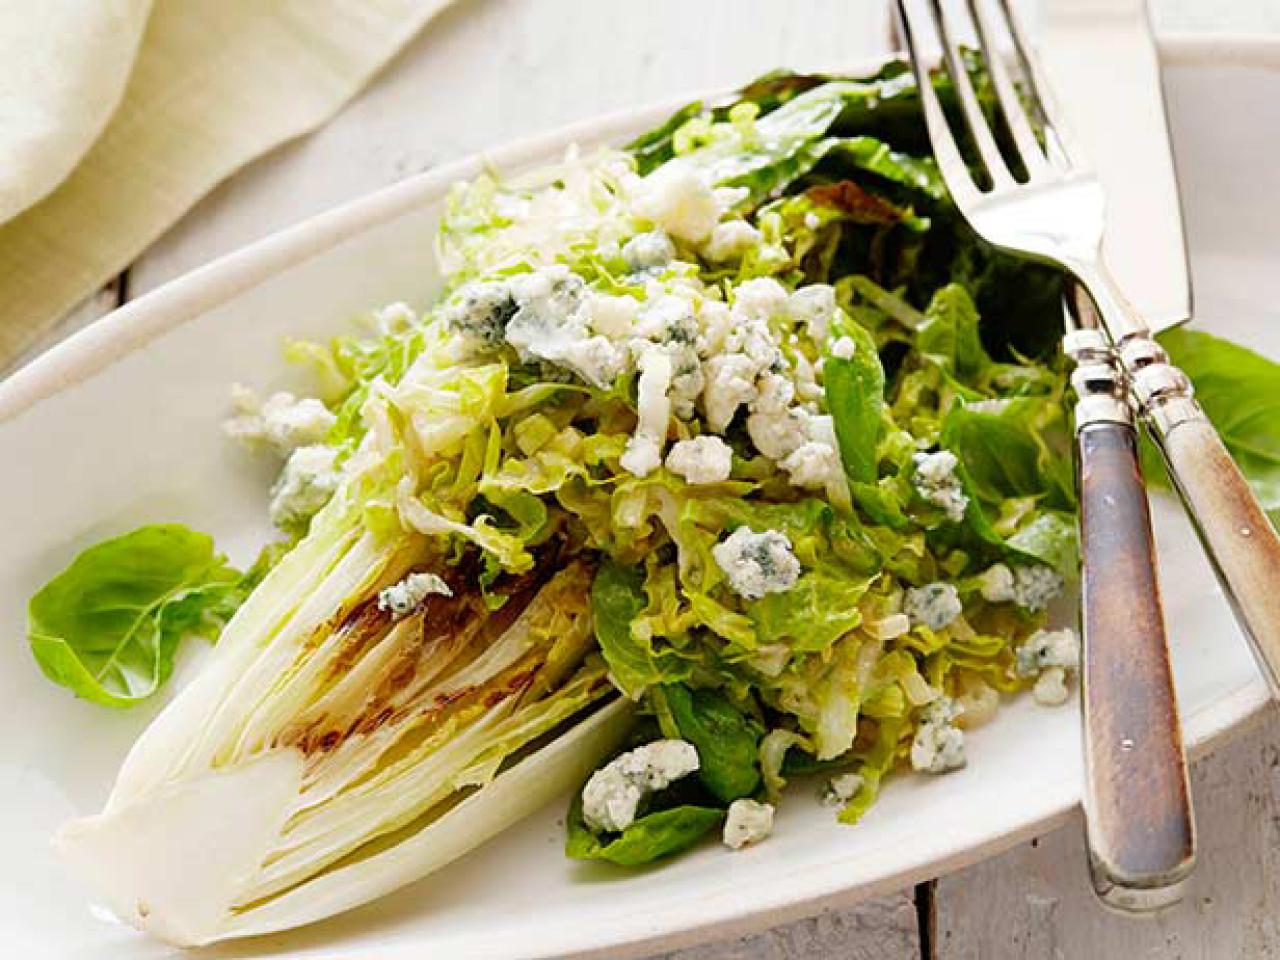 https://food.fnr.sndimg.com/content/dam/images/food/fullset/2013/4/17/0/GE0301H_Grilled-Romaine-with-Blue-Cheese_s4x3.jpg.rend.hgtvcom.1280.960.suffix/1371616092192.jpeg